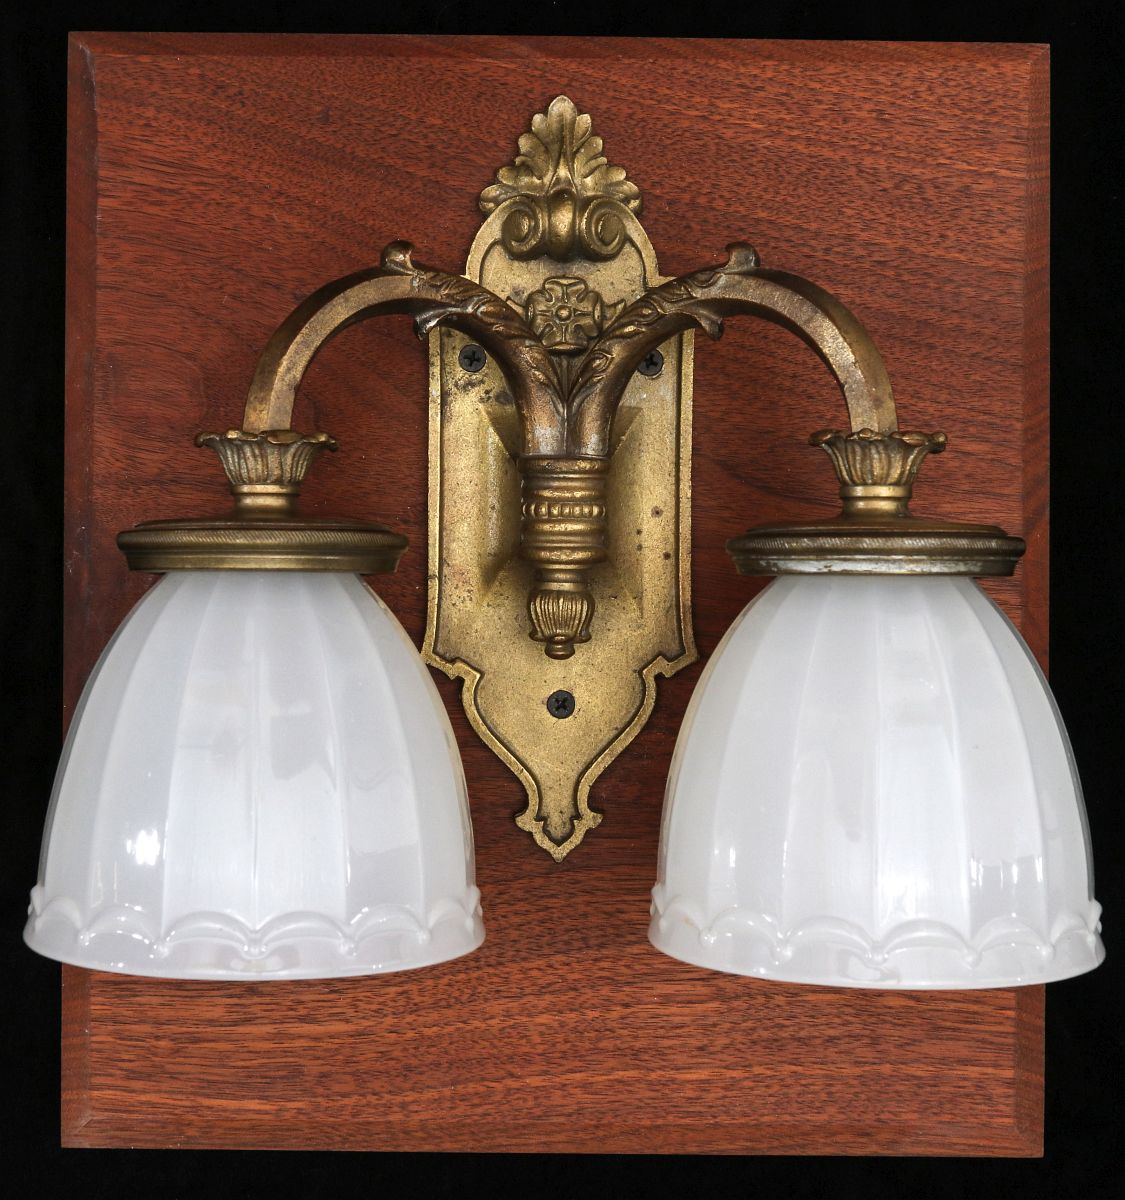 A PULLMAN CO. TWO-LIGHT RAILCAR SIDE LAMP